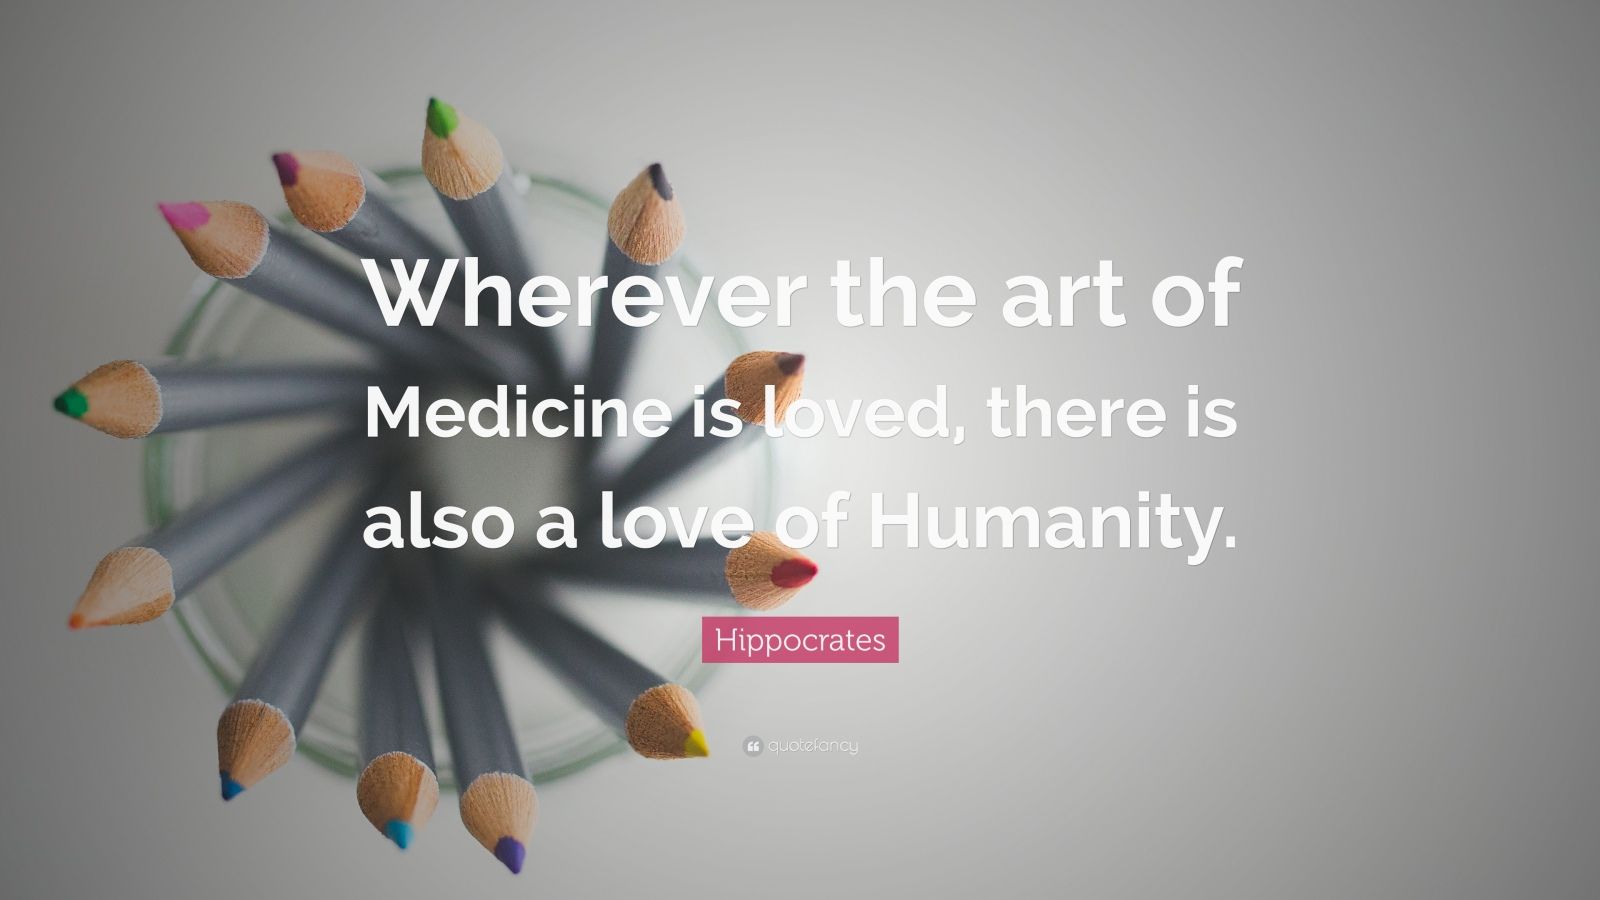 Hippocrates Quote “Wherever the art of Medicine is loved